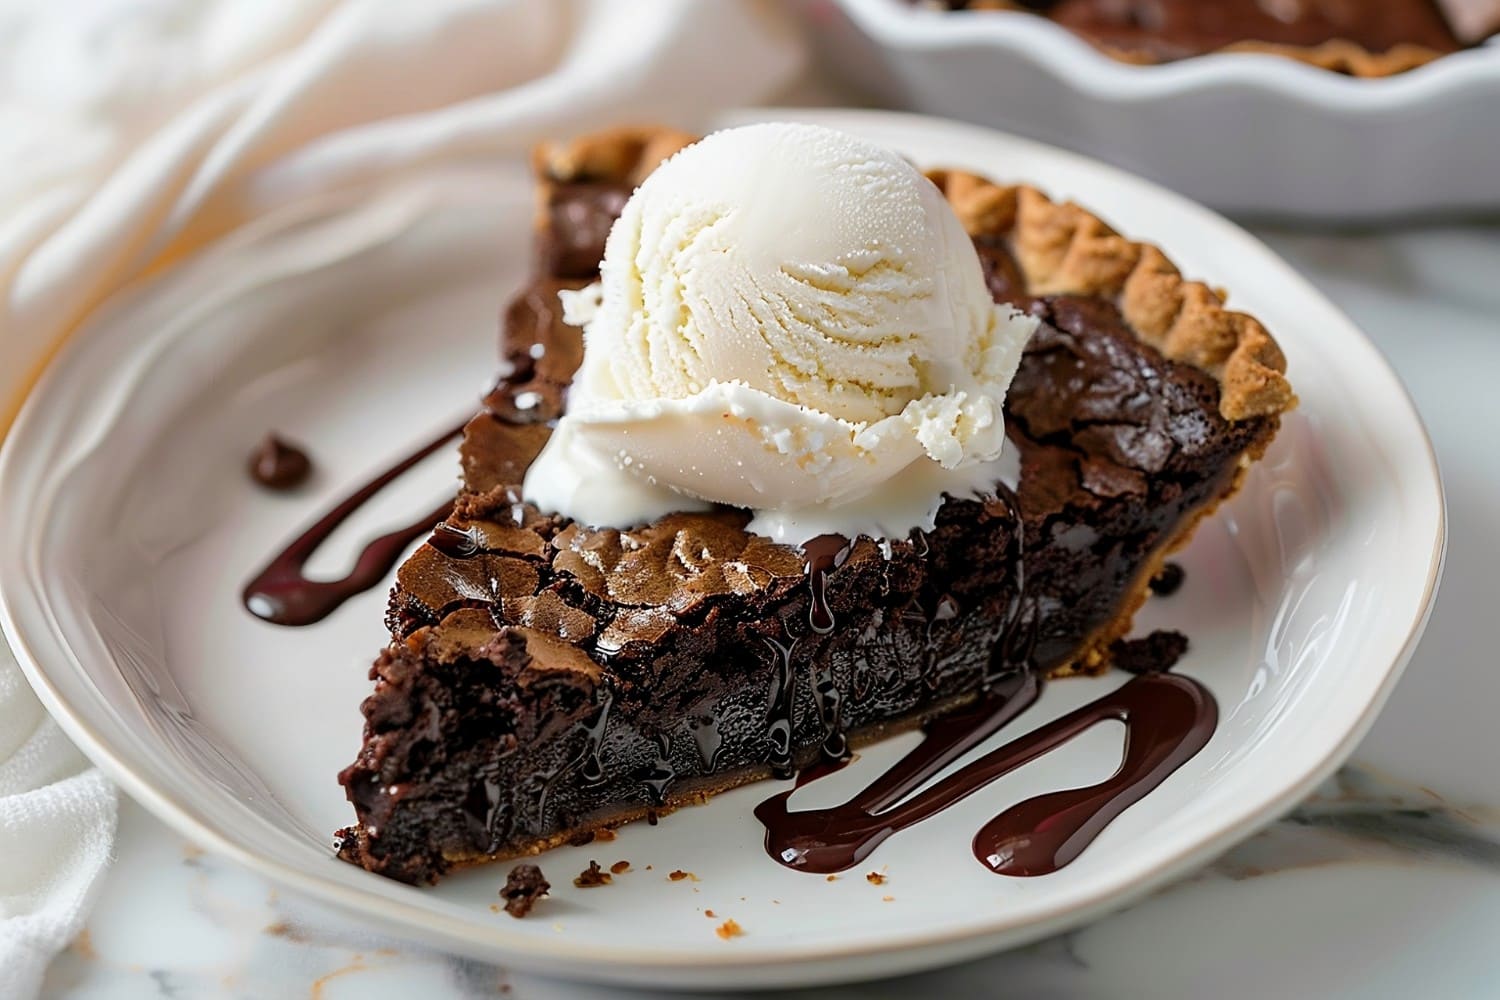 Gourmet brownie pie, featuring layers of rich chocolate goodness in every bite